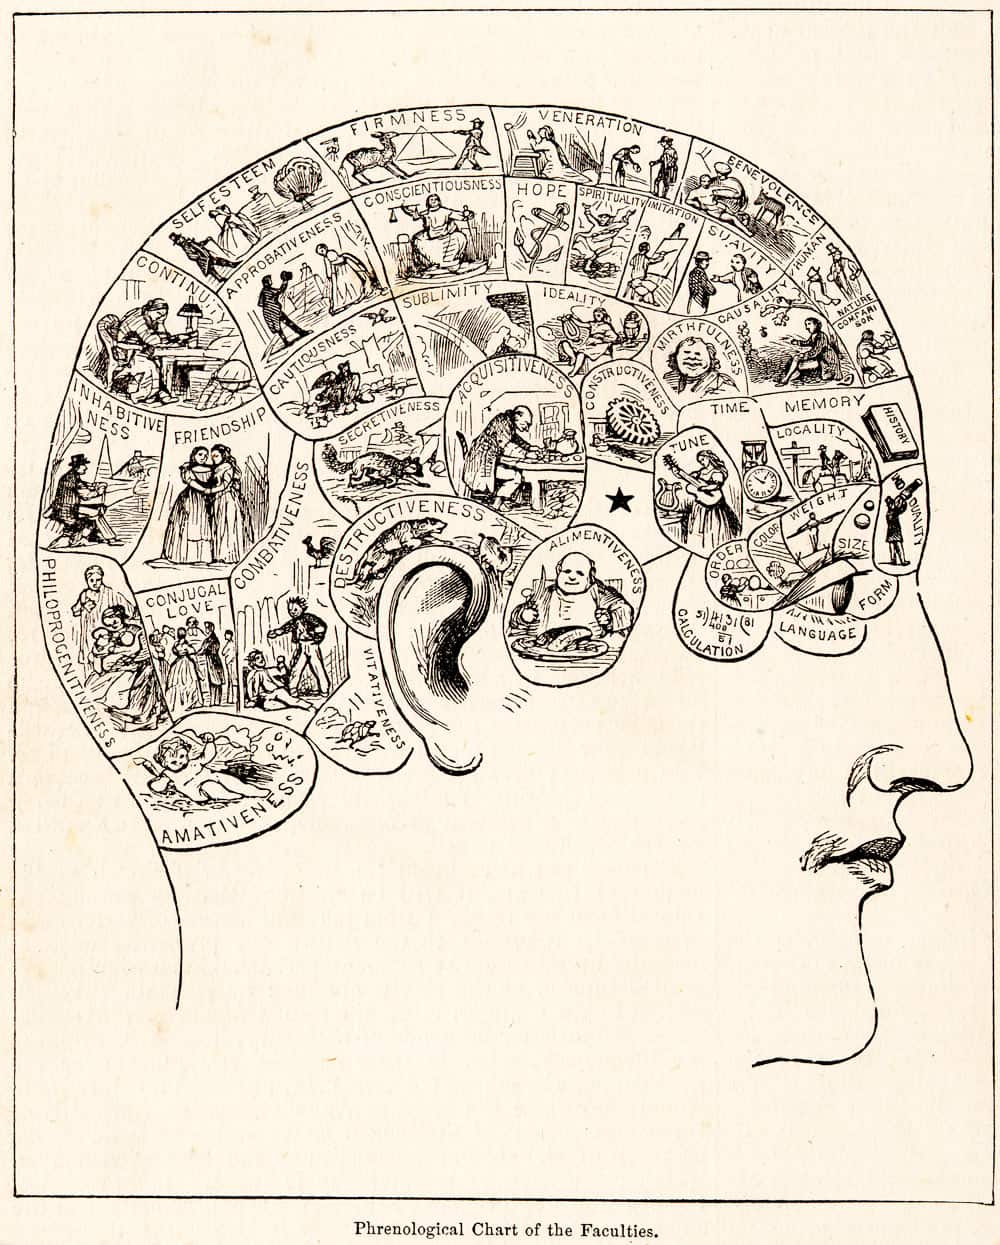 Peaple’s Cyclopedia of Universal Knowledge: Phrenological Chart of the Faculties (1883)